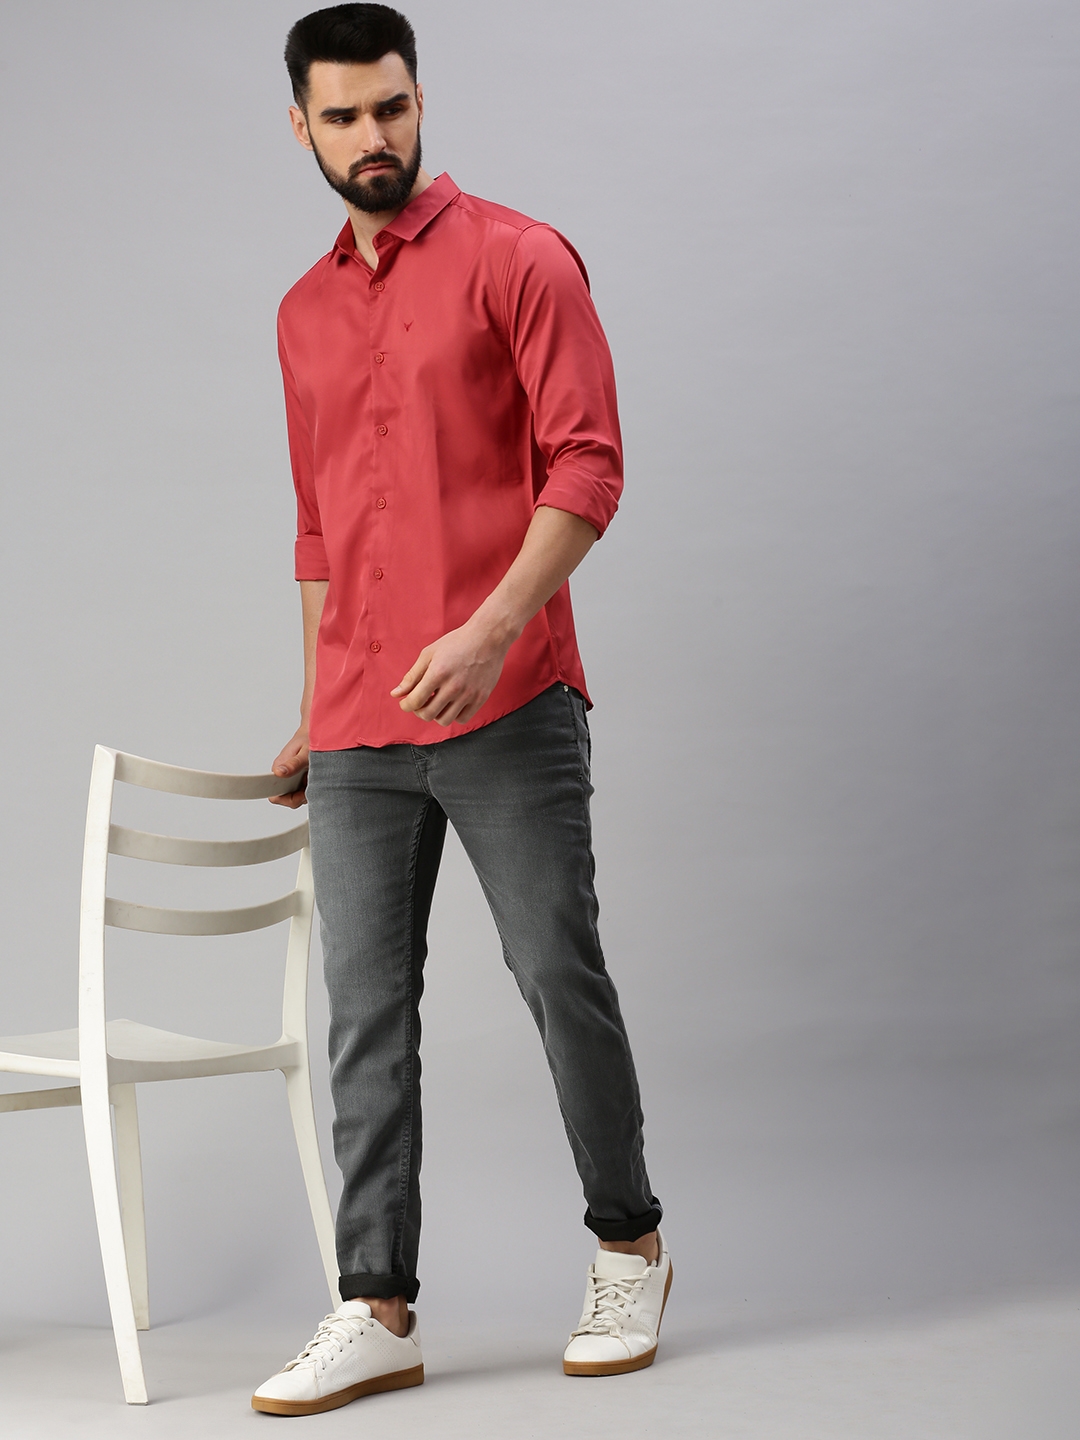 Men's Red Satin Solid Casual Shirts